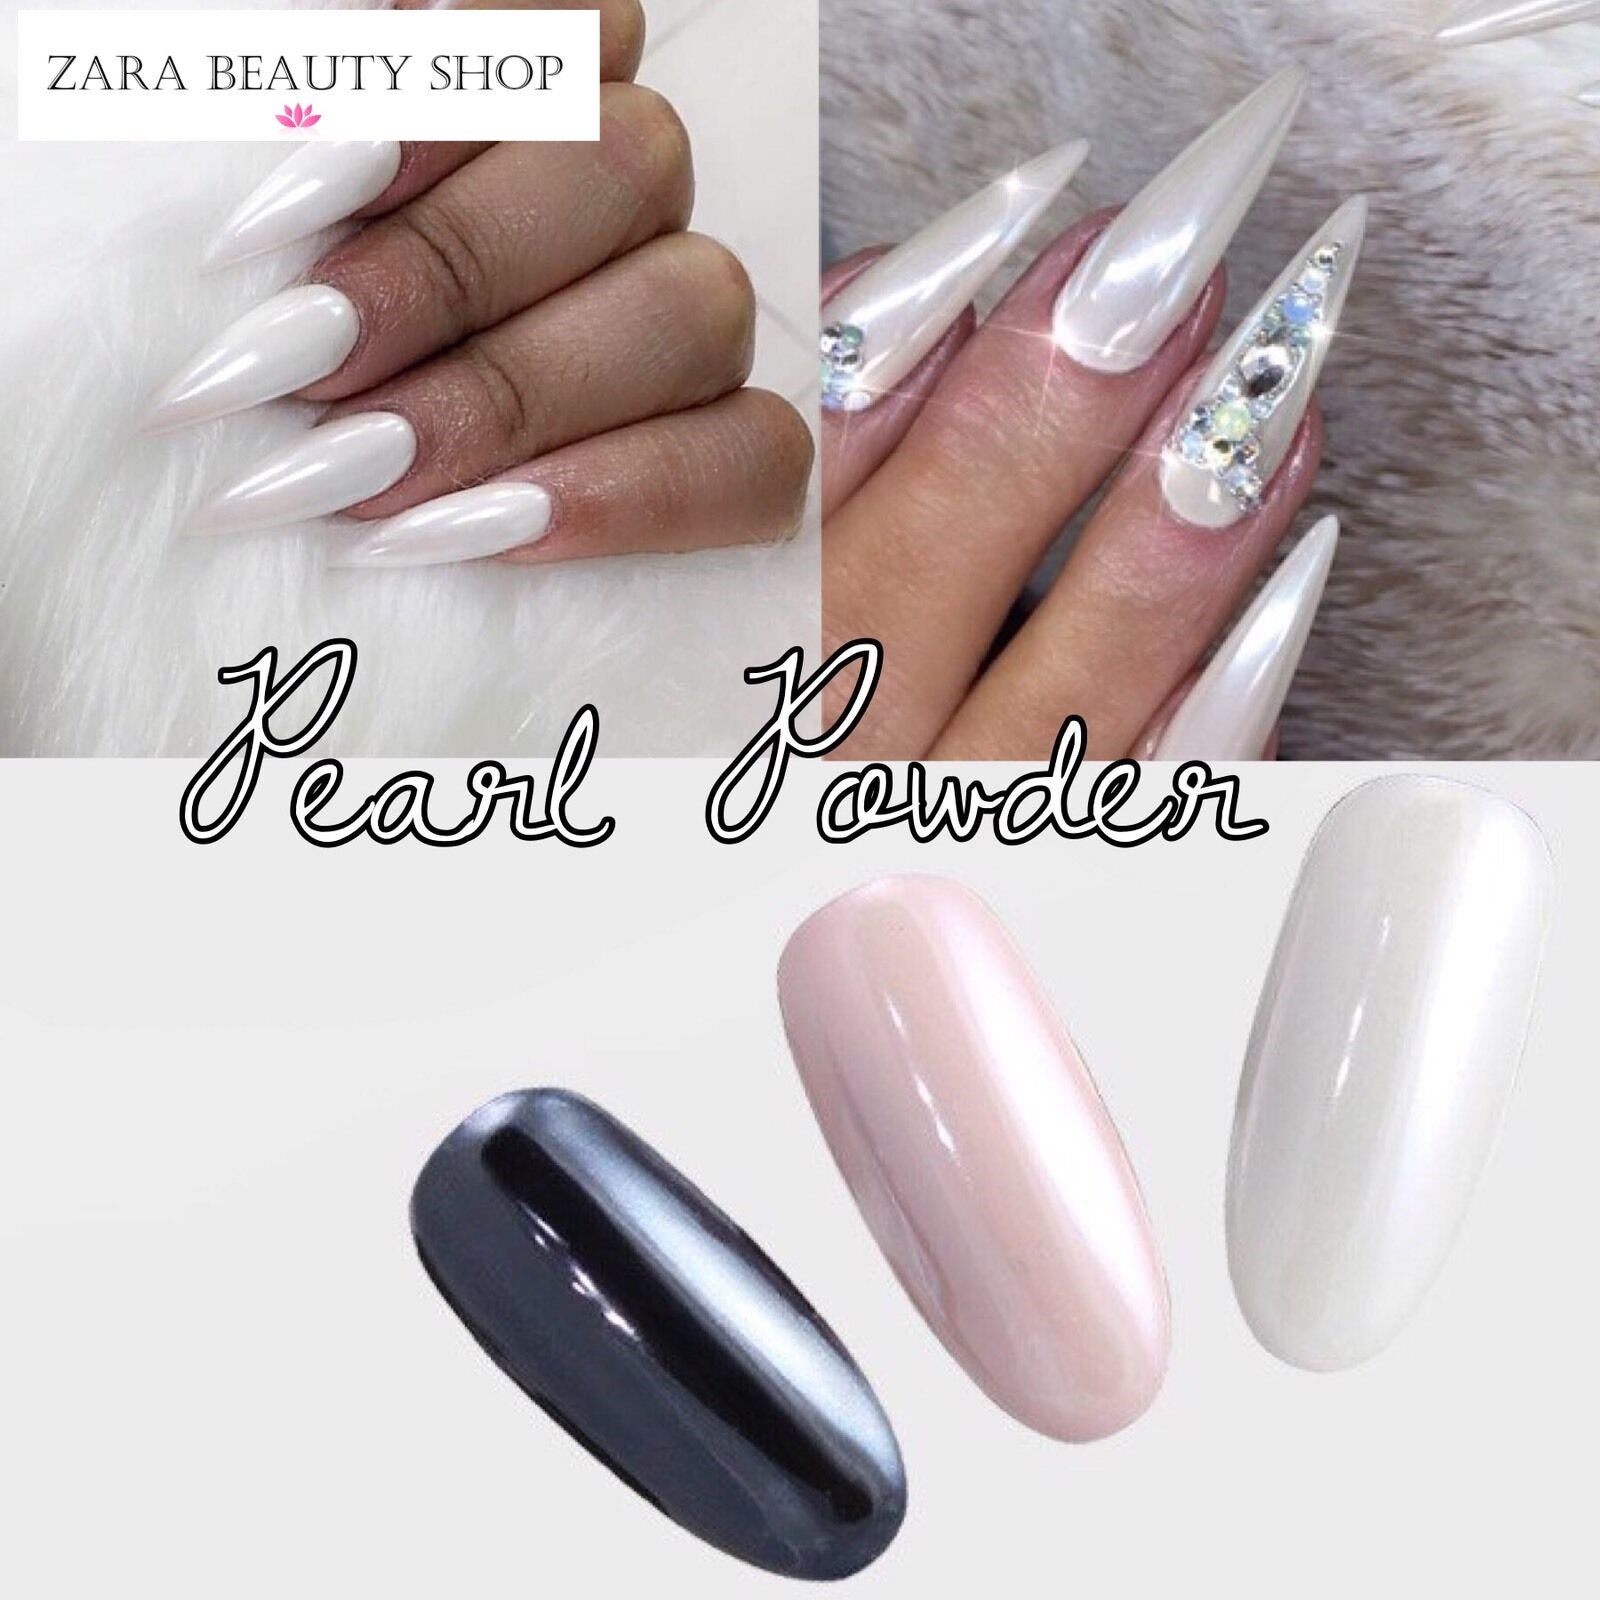 White Pearl Nail Mirror Pearlescent Chrome Powder Sheer Dust Nails High  Shine Gunmetal Crystal Shiny Manicure Matte DIY Shimmer Glazed Donut -   Finland